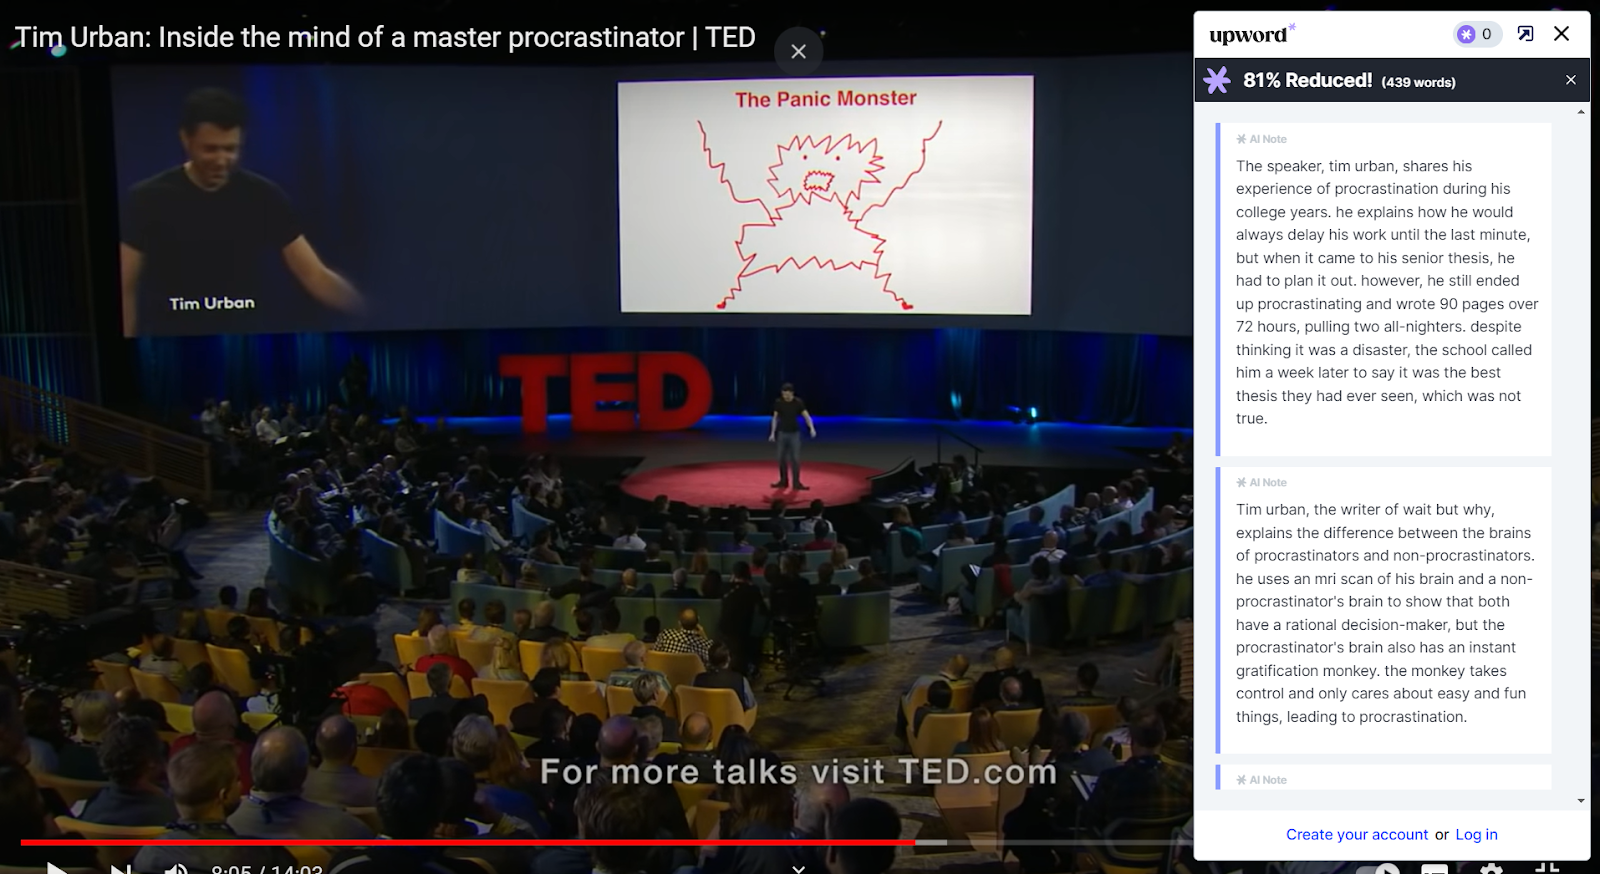 TED Talk by Tim Urban called "Inside the mind of a master procrastinator"